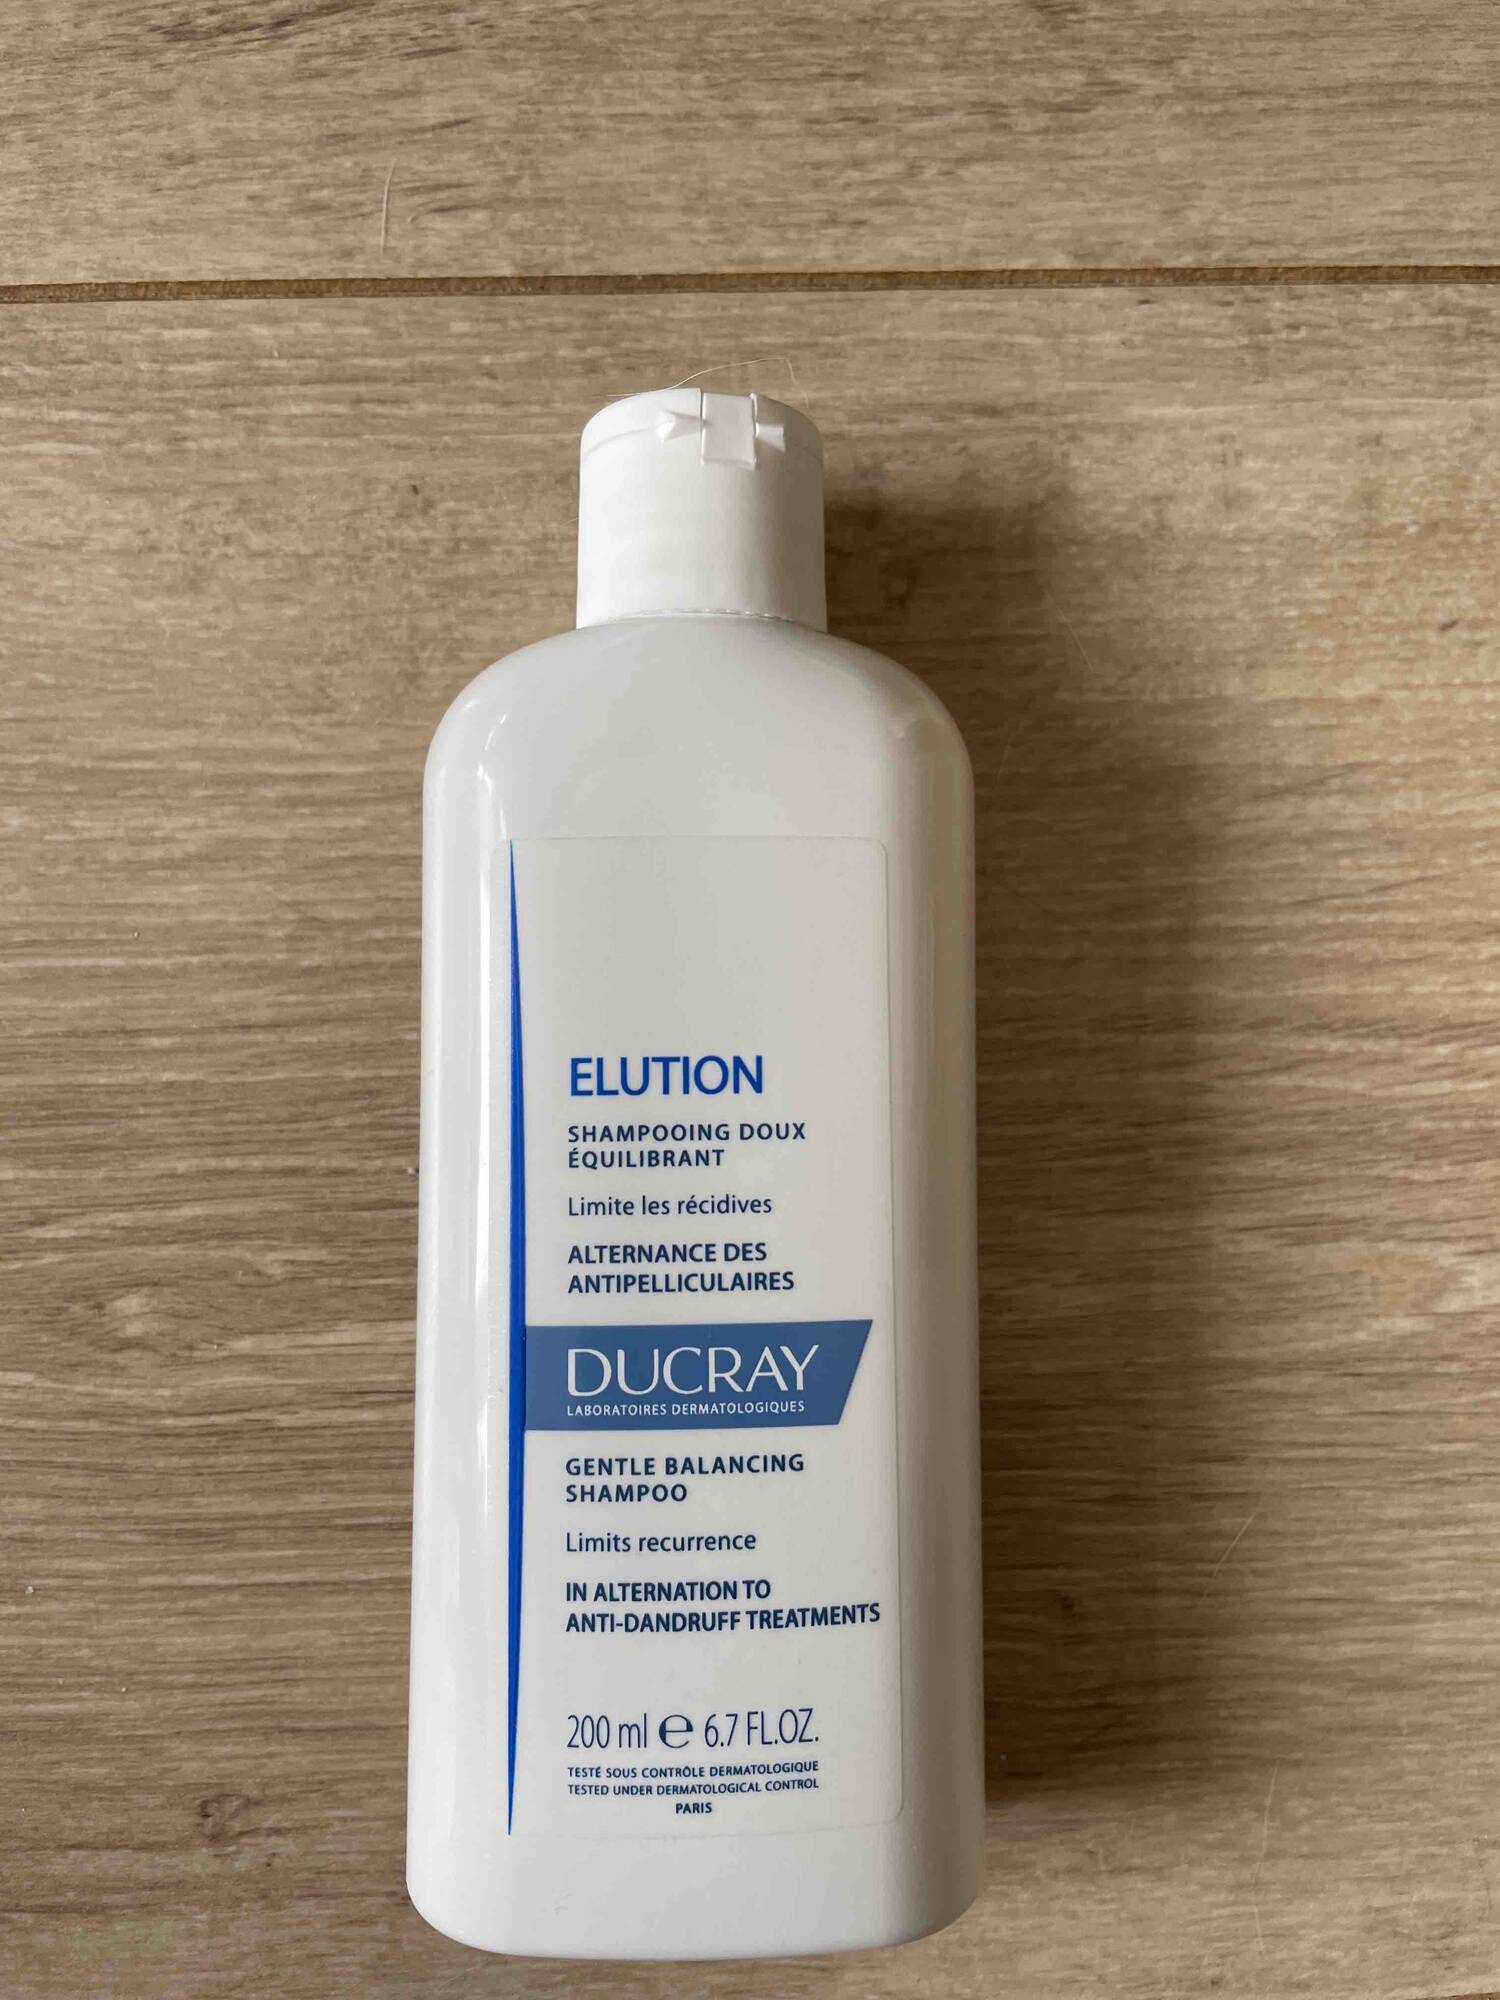 DUCRAY - Elution - Shampooing doux équilibrant